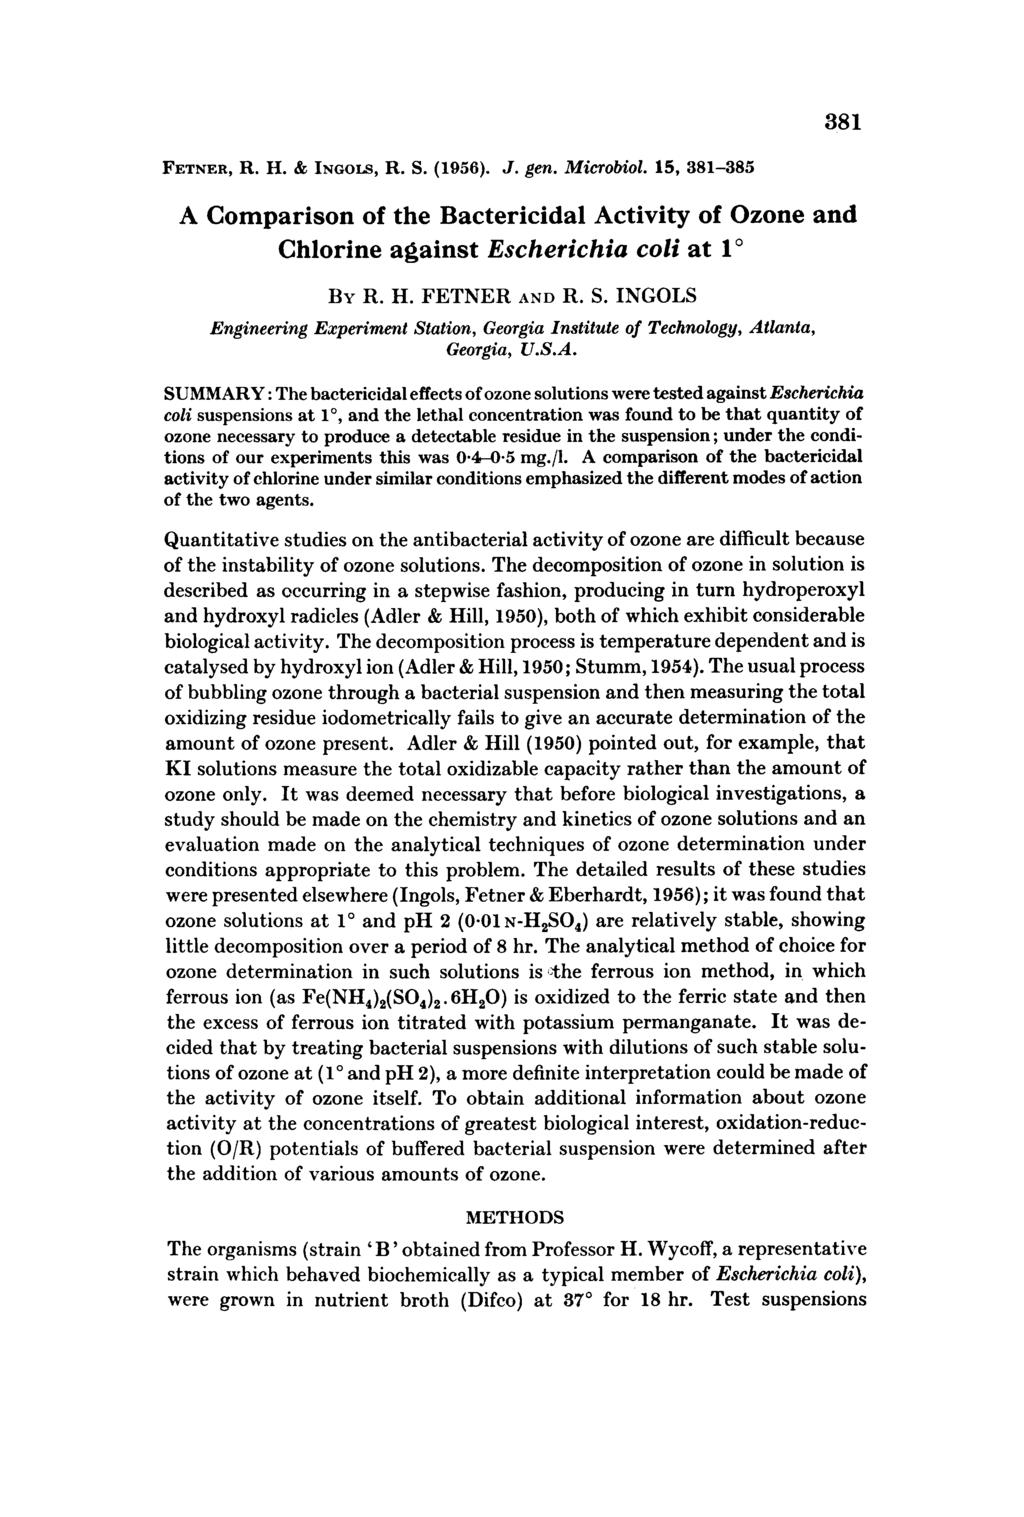 381 FETNER, R. H. & INGOLS, R. S. (1956). J. gen. Microbial. 15, 381-385 A Comparison of the Bactericidal Activity of Ozone and Chlorine against Escherichia coli at 1 O BY R. H. FETNER AND R. S. INGOLS Engineering Experiment Station, Georgia Institute of Technology, Atlanta, Georgia, U.